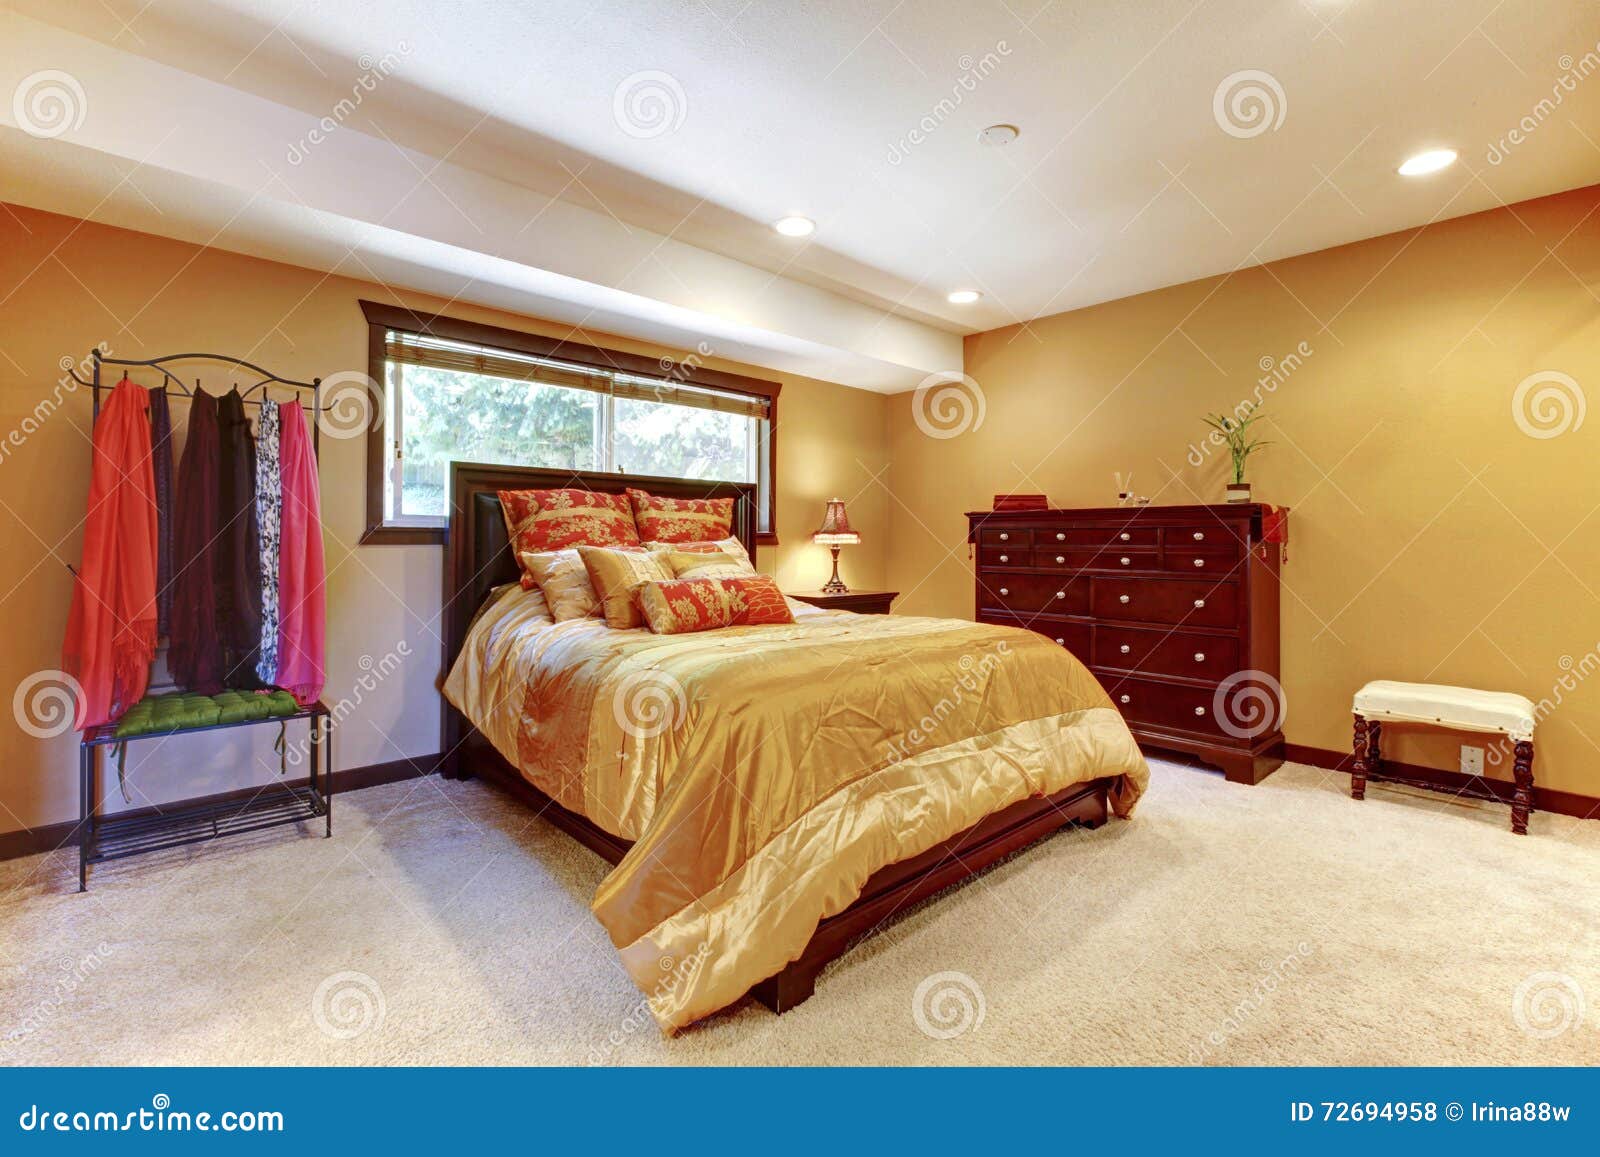 Single Woman Asian Master Bedroom Interior With Yellow Walls